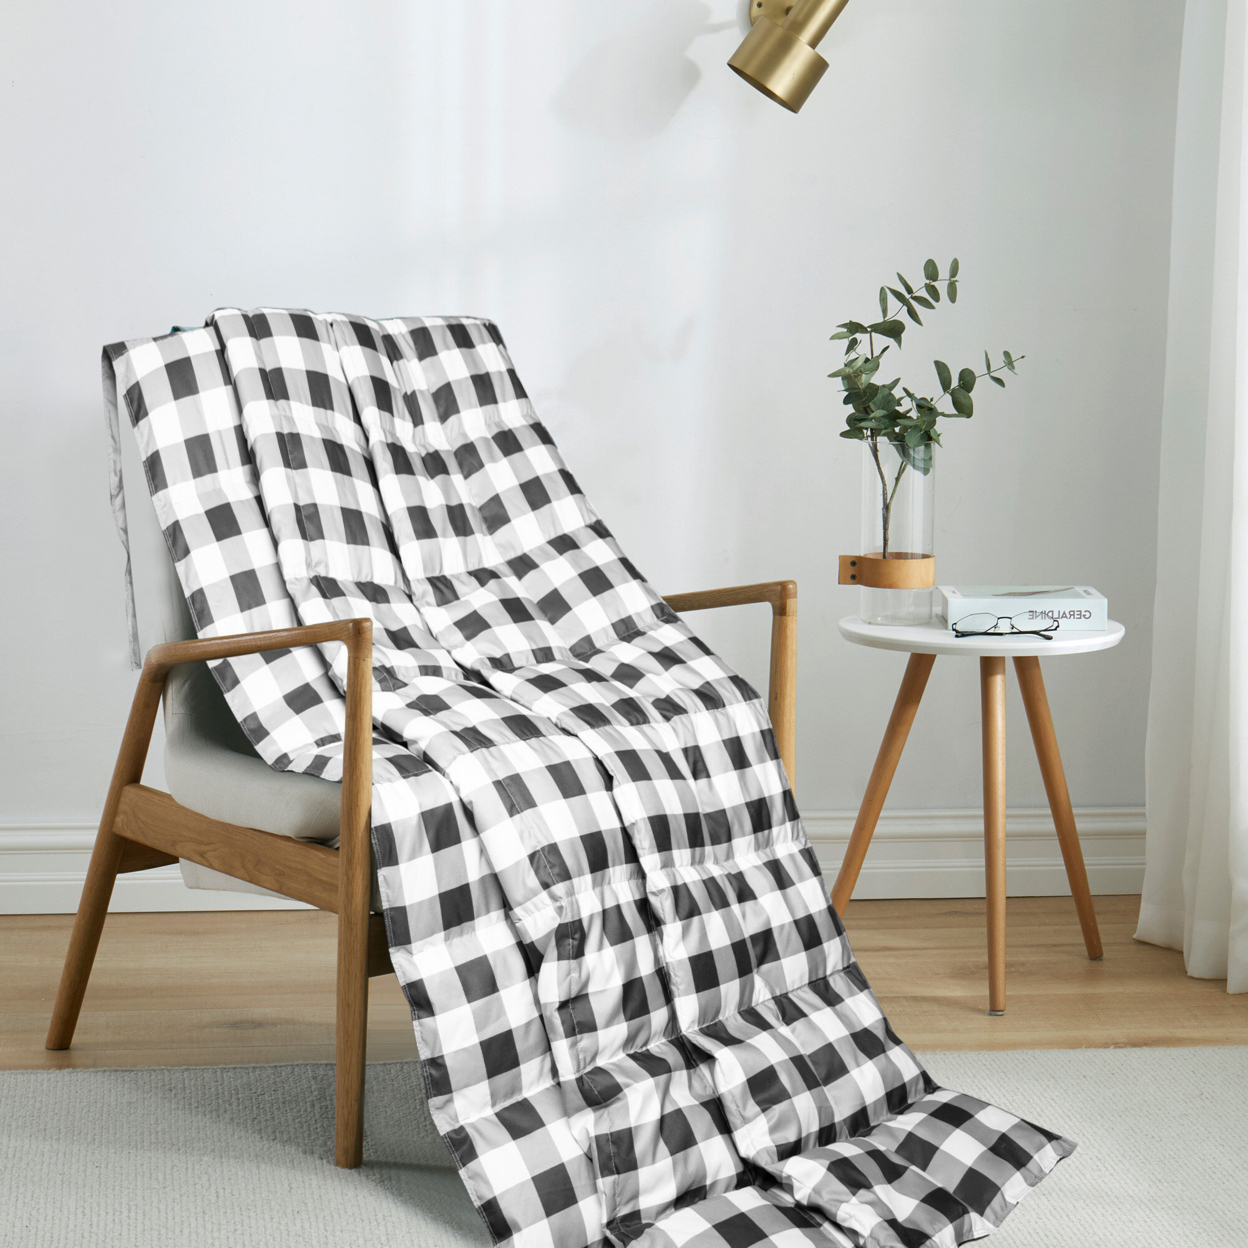 Natural Down Blanket Filled With UltraFeather And Down, Throw Blanket (50 X 70) Sewn Through Box Design - White And Black